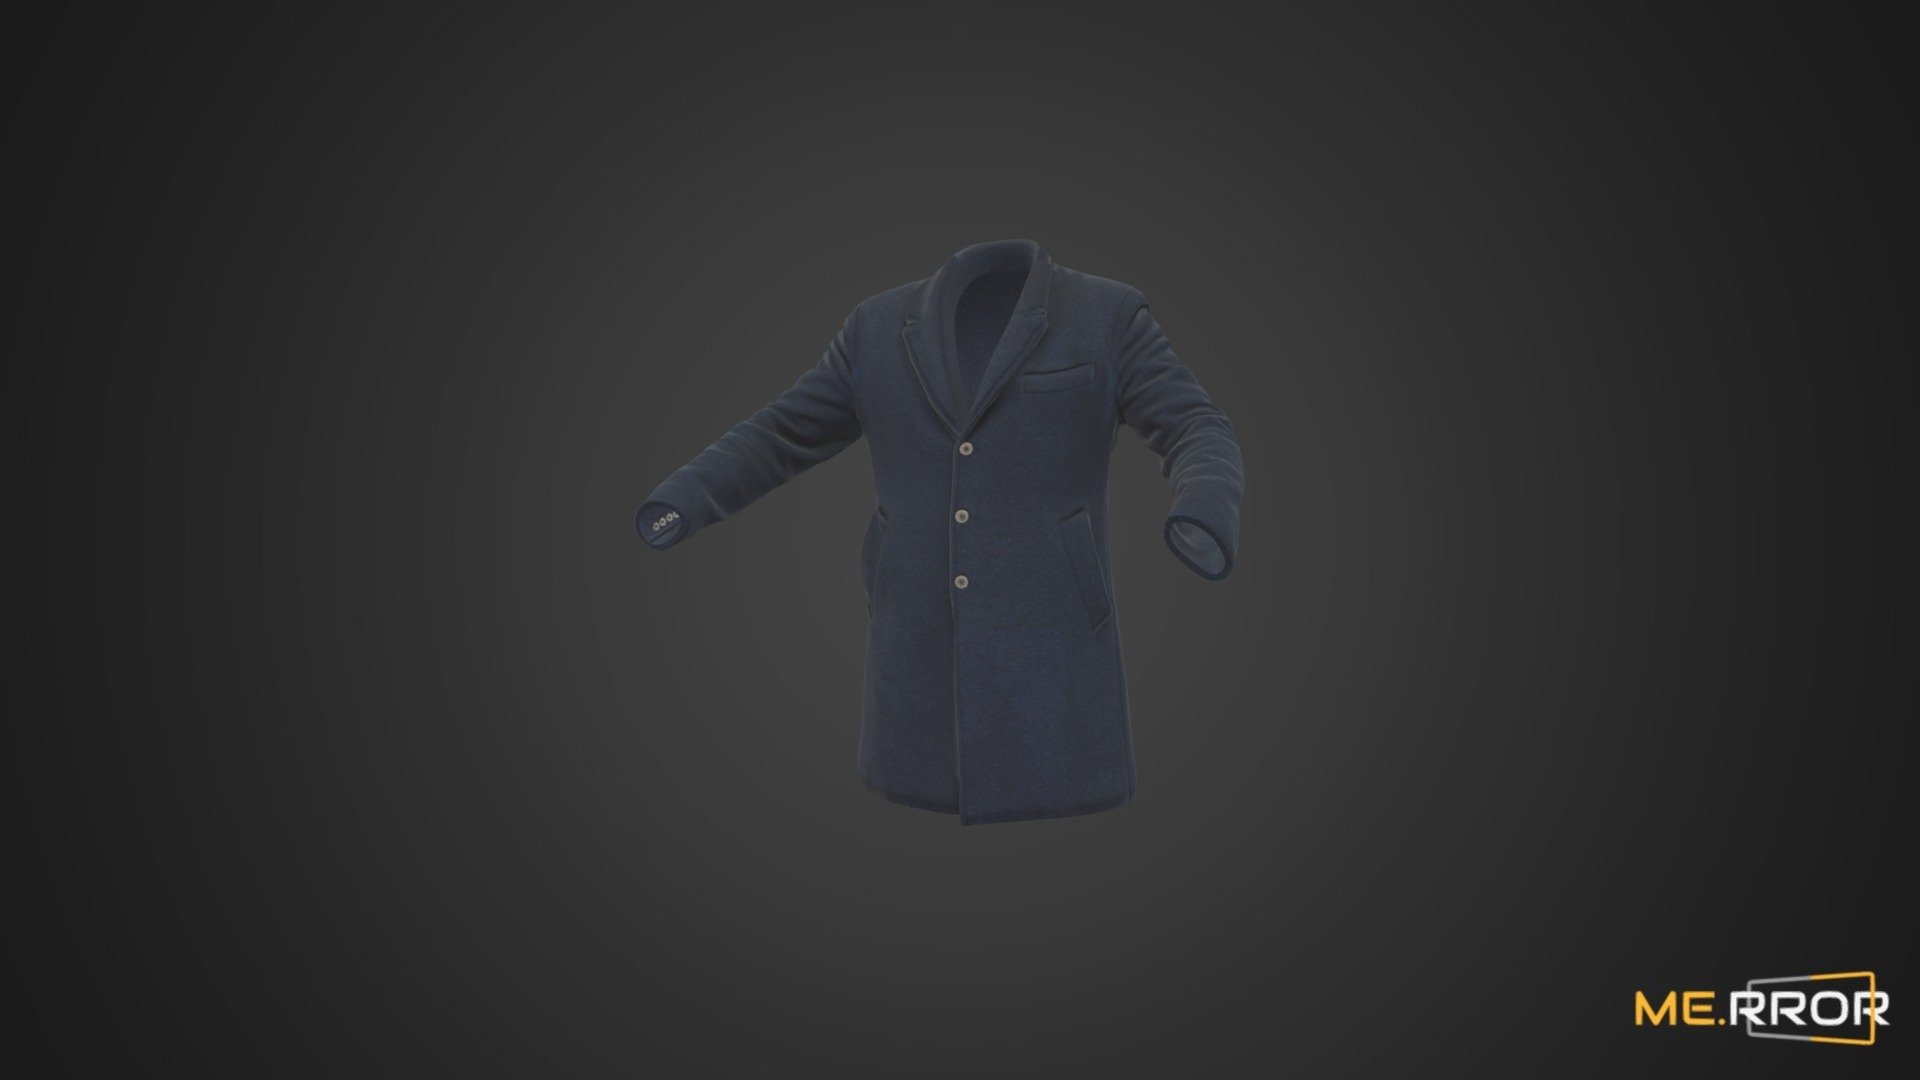 MERROR is a 3D Content PLATFORM which introduces various Asian assets to the 3D world


3DScanning #Photogrametry #ME.RROR - [Game-Ready] Male Navy Coat - Buy Royalty Free 3D model by ME.RROR (@merror) 3d model